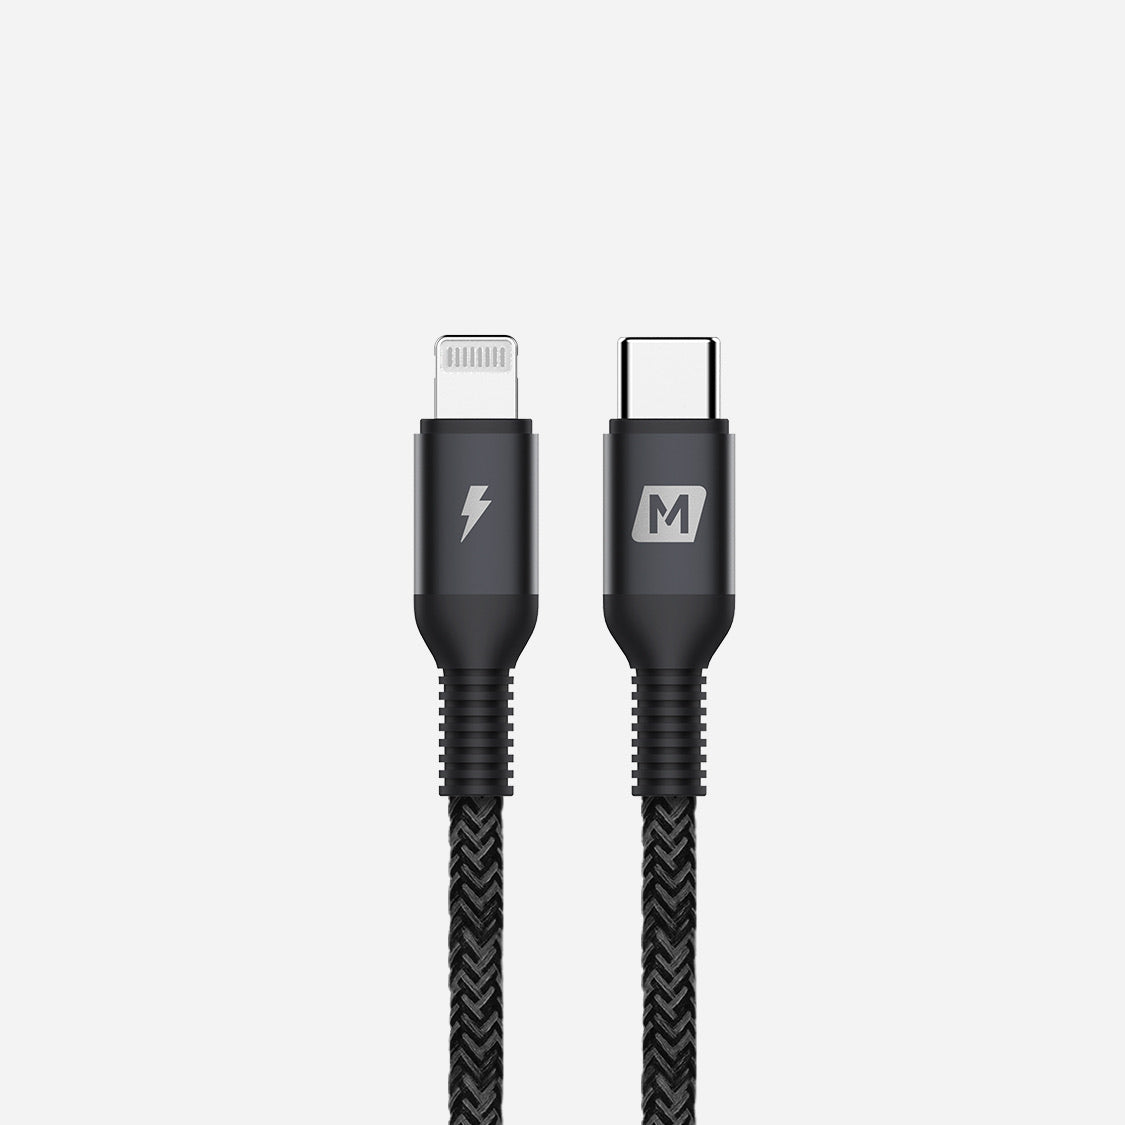 Momax Elite Link Type-C to Lightning Cable Triple Braided 0.3M - TECH STREET